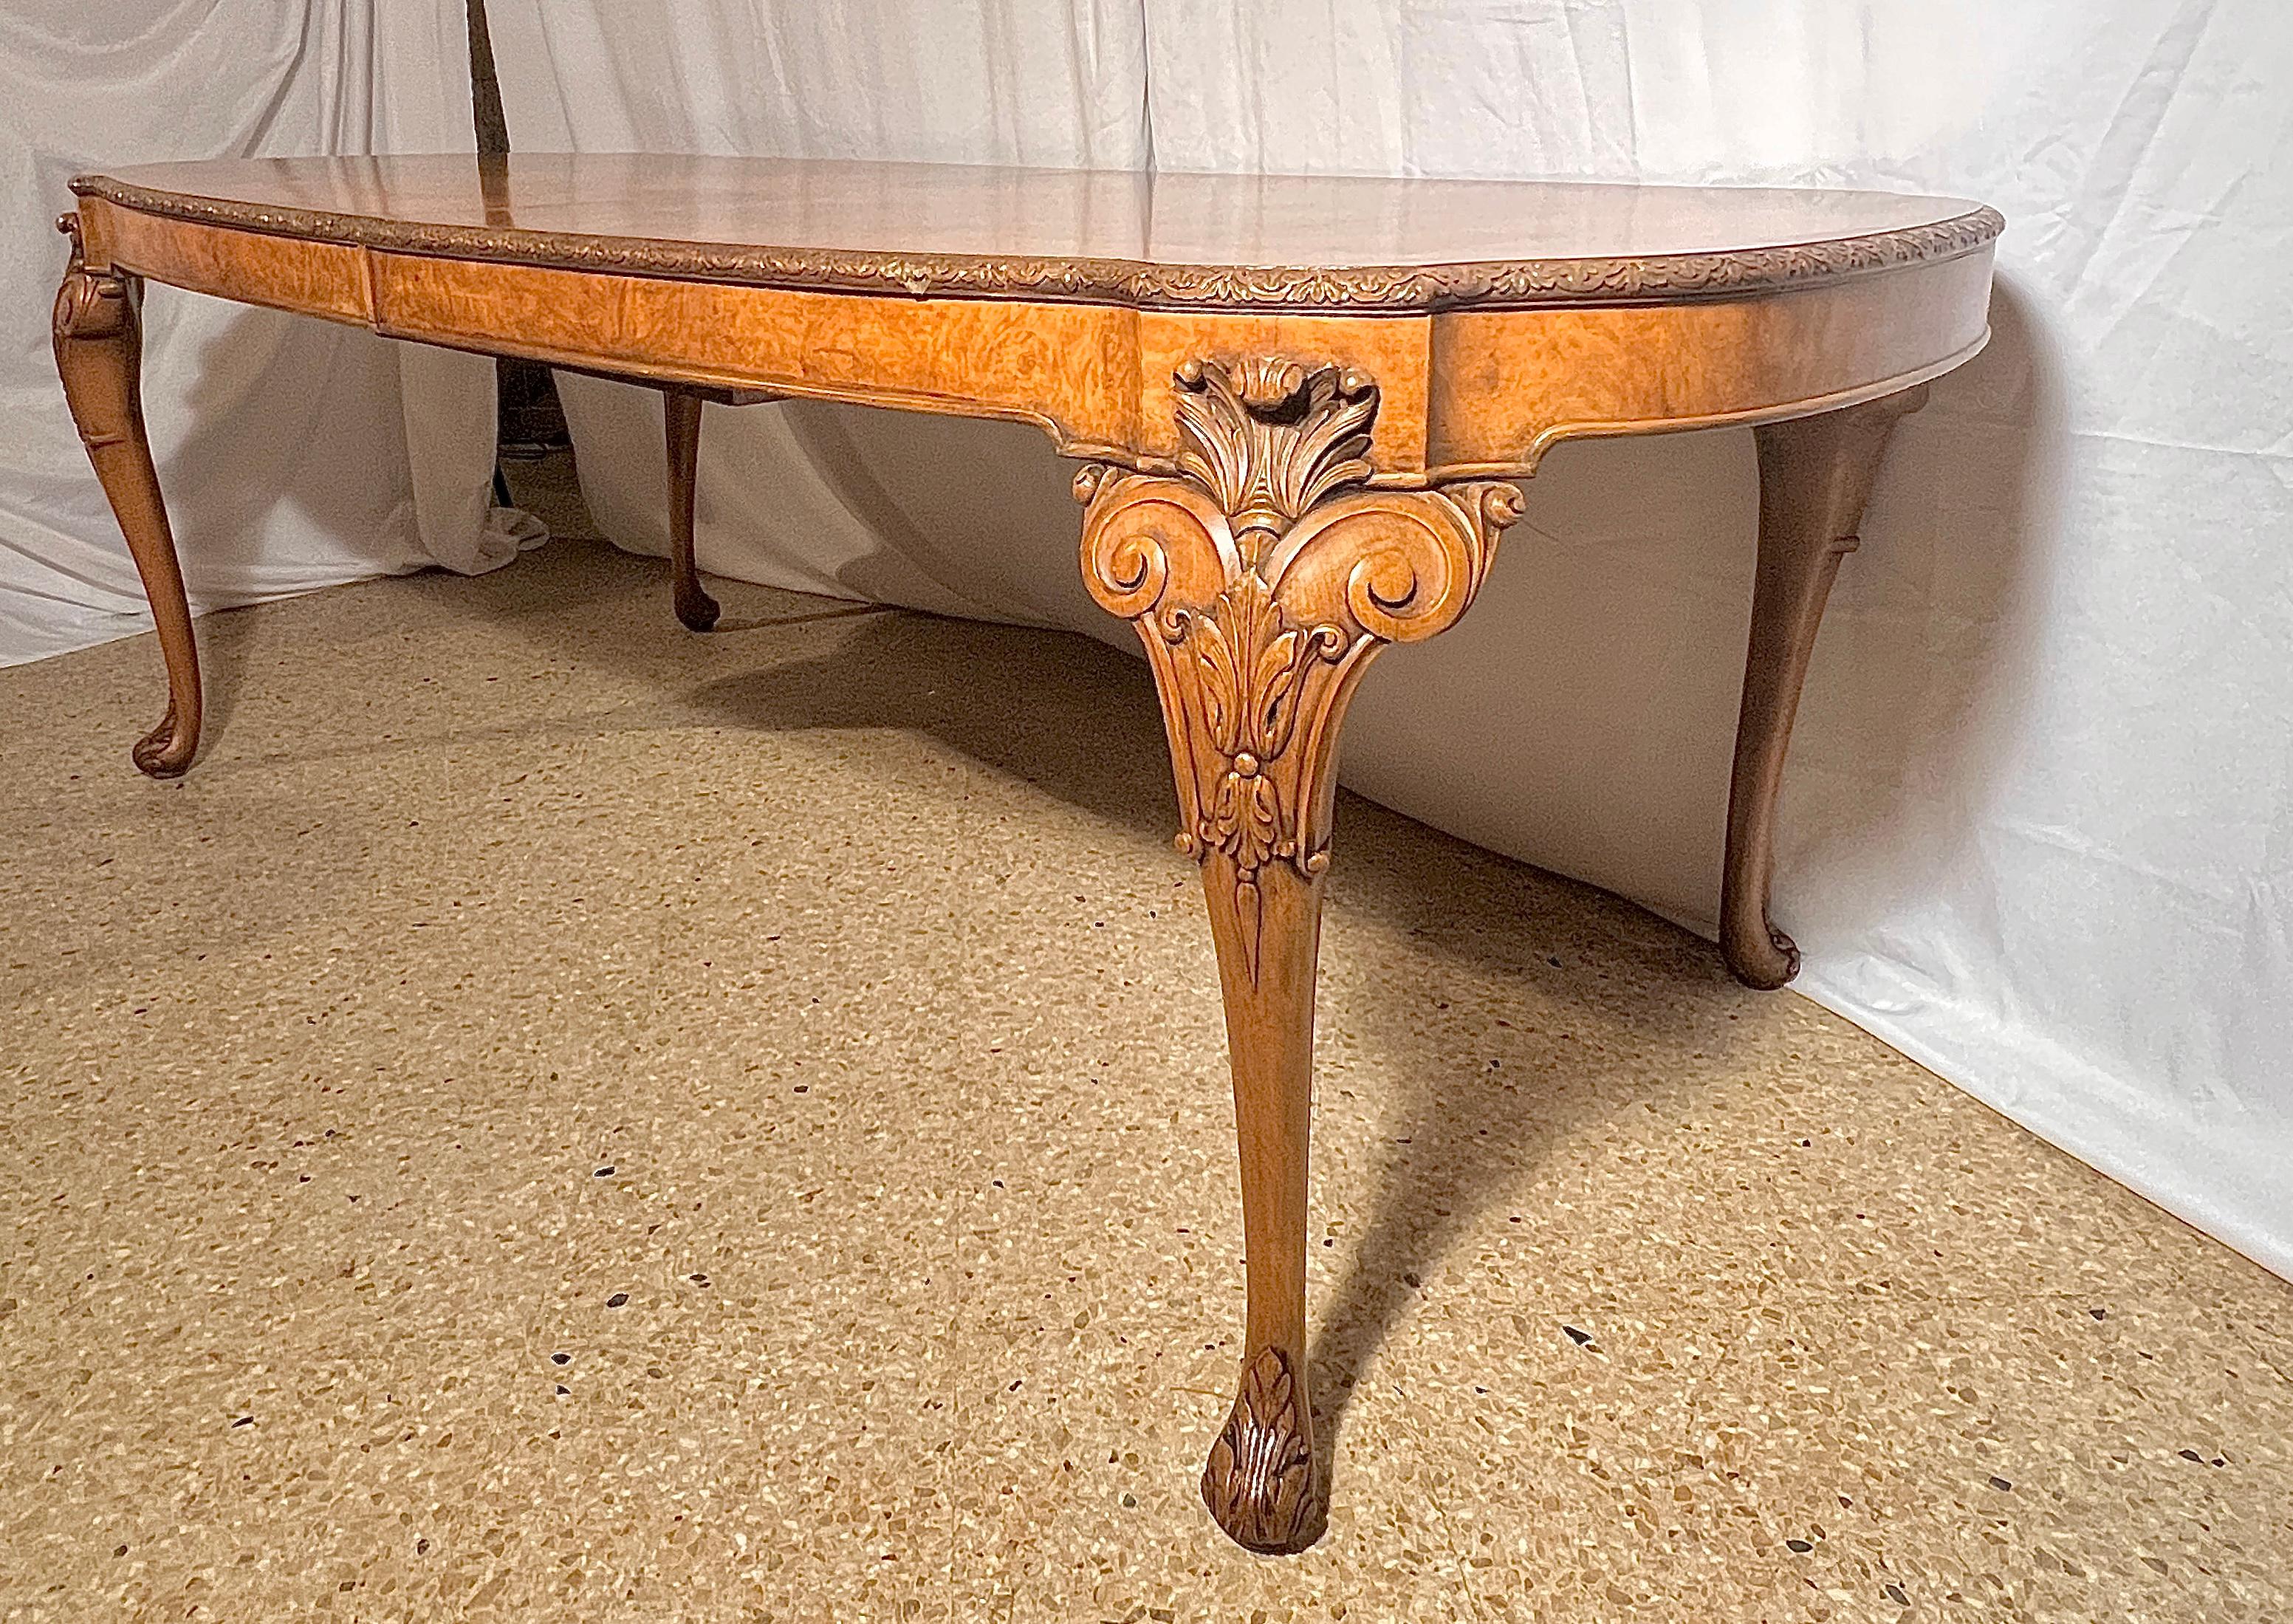 Antique English Carved Burled Walnut Dining Table with Interior Leaf, Circa 1900 In Good Condition For Sale In New Orleans, LA